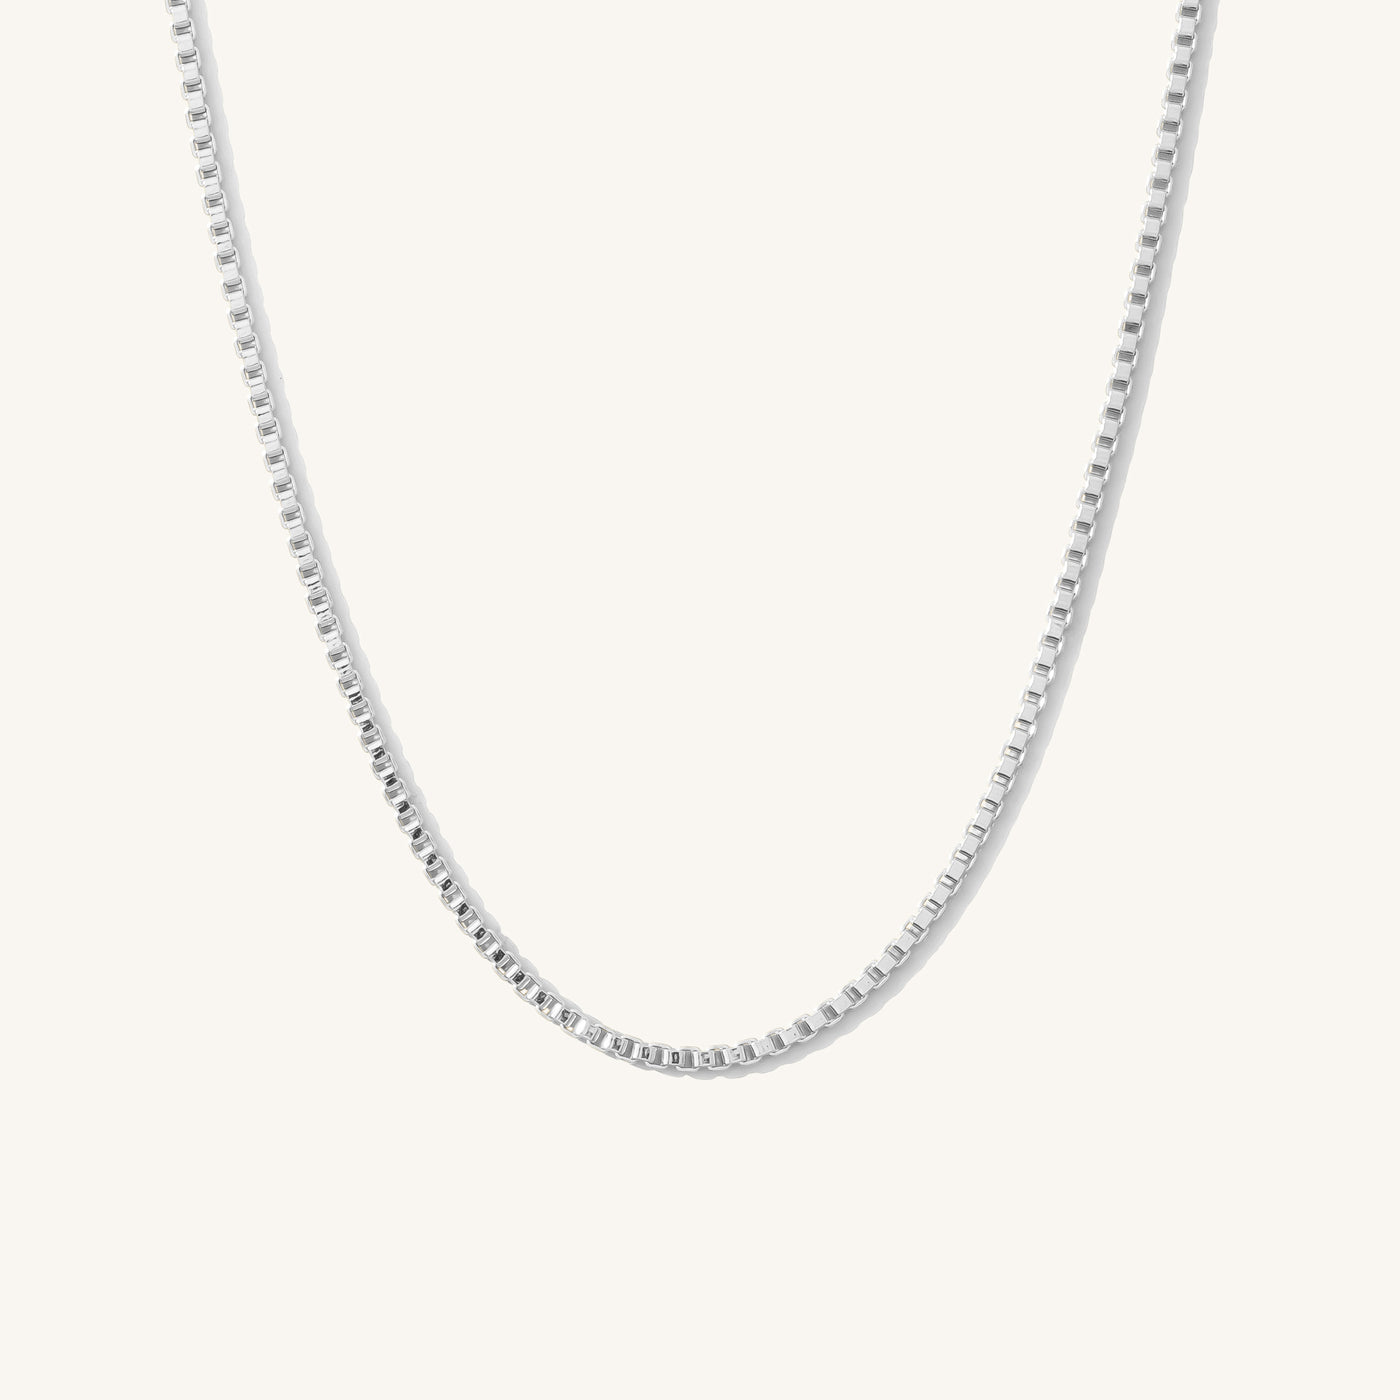 Box Chain Necklace | Simple & Dainty Jewelry